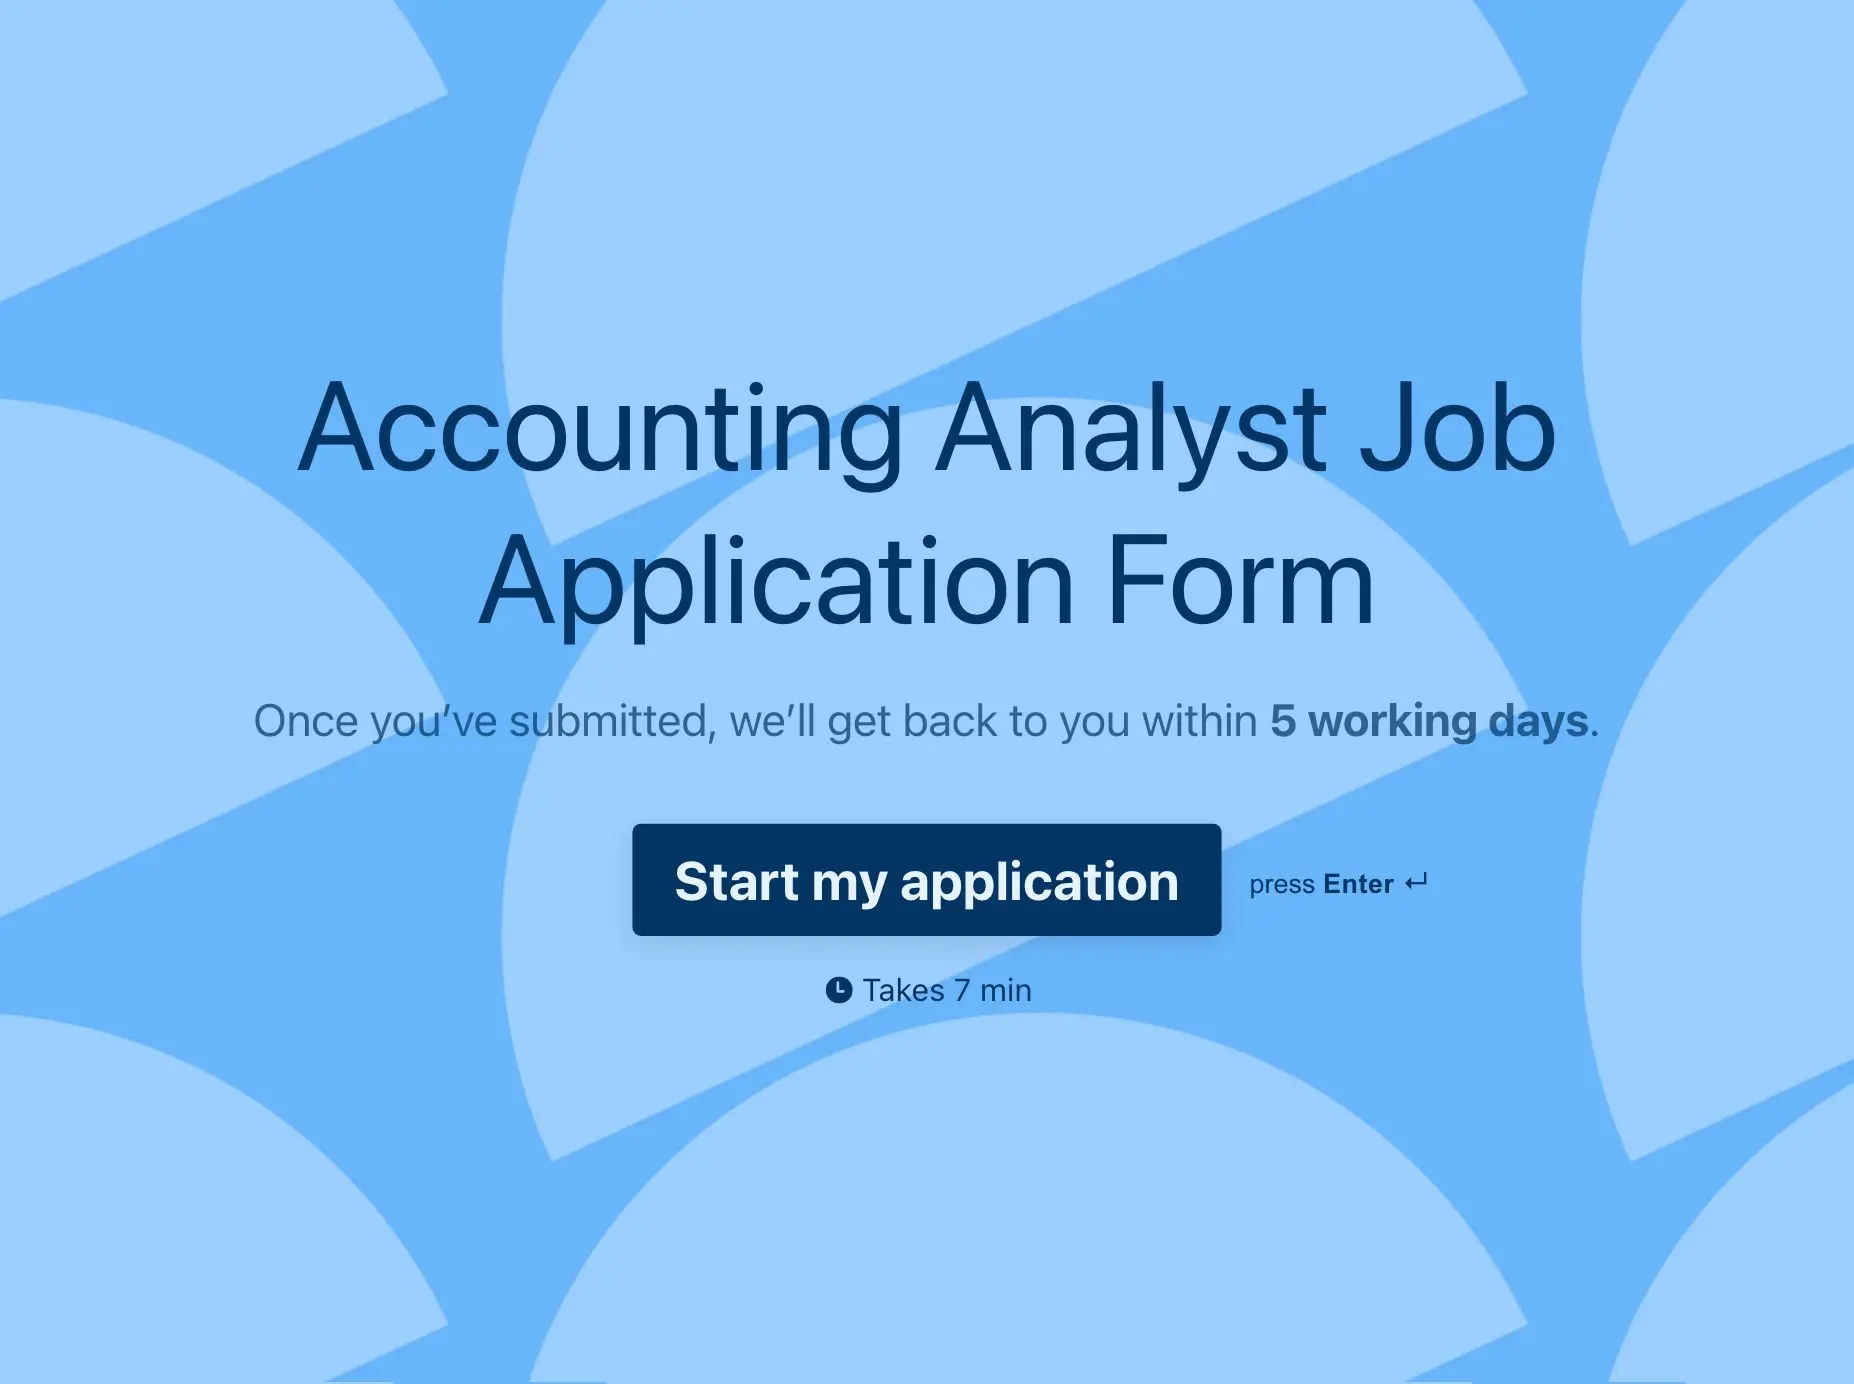 Accounting Analyst Job Application Form Template Hero